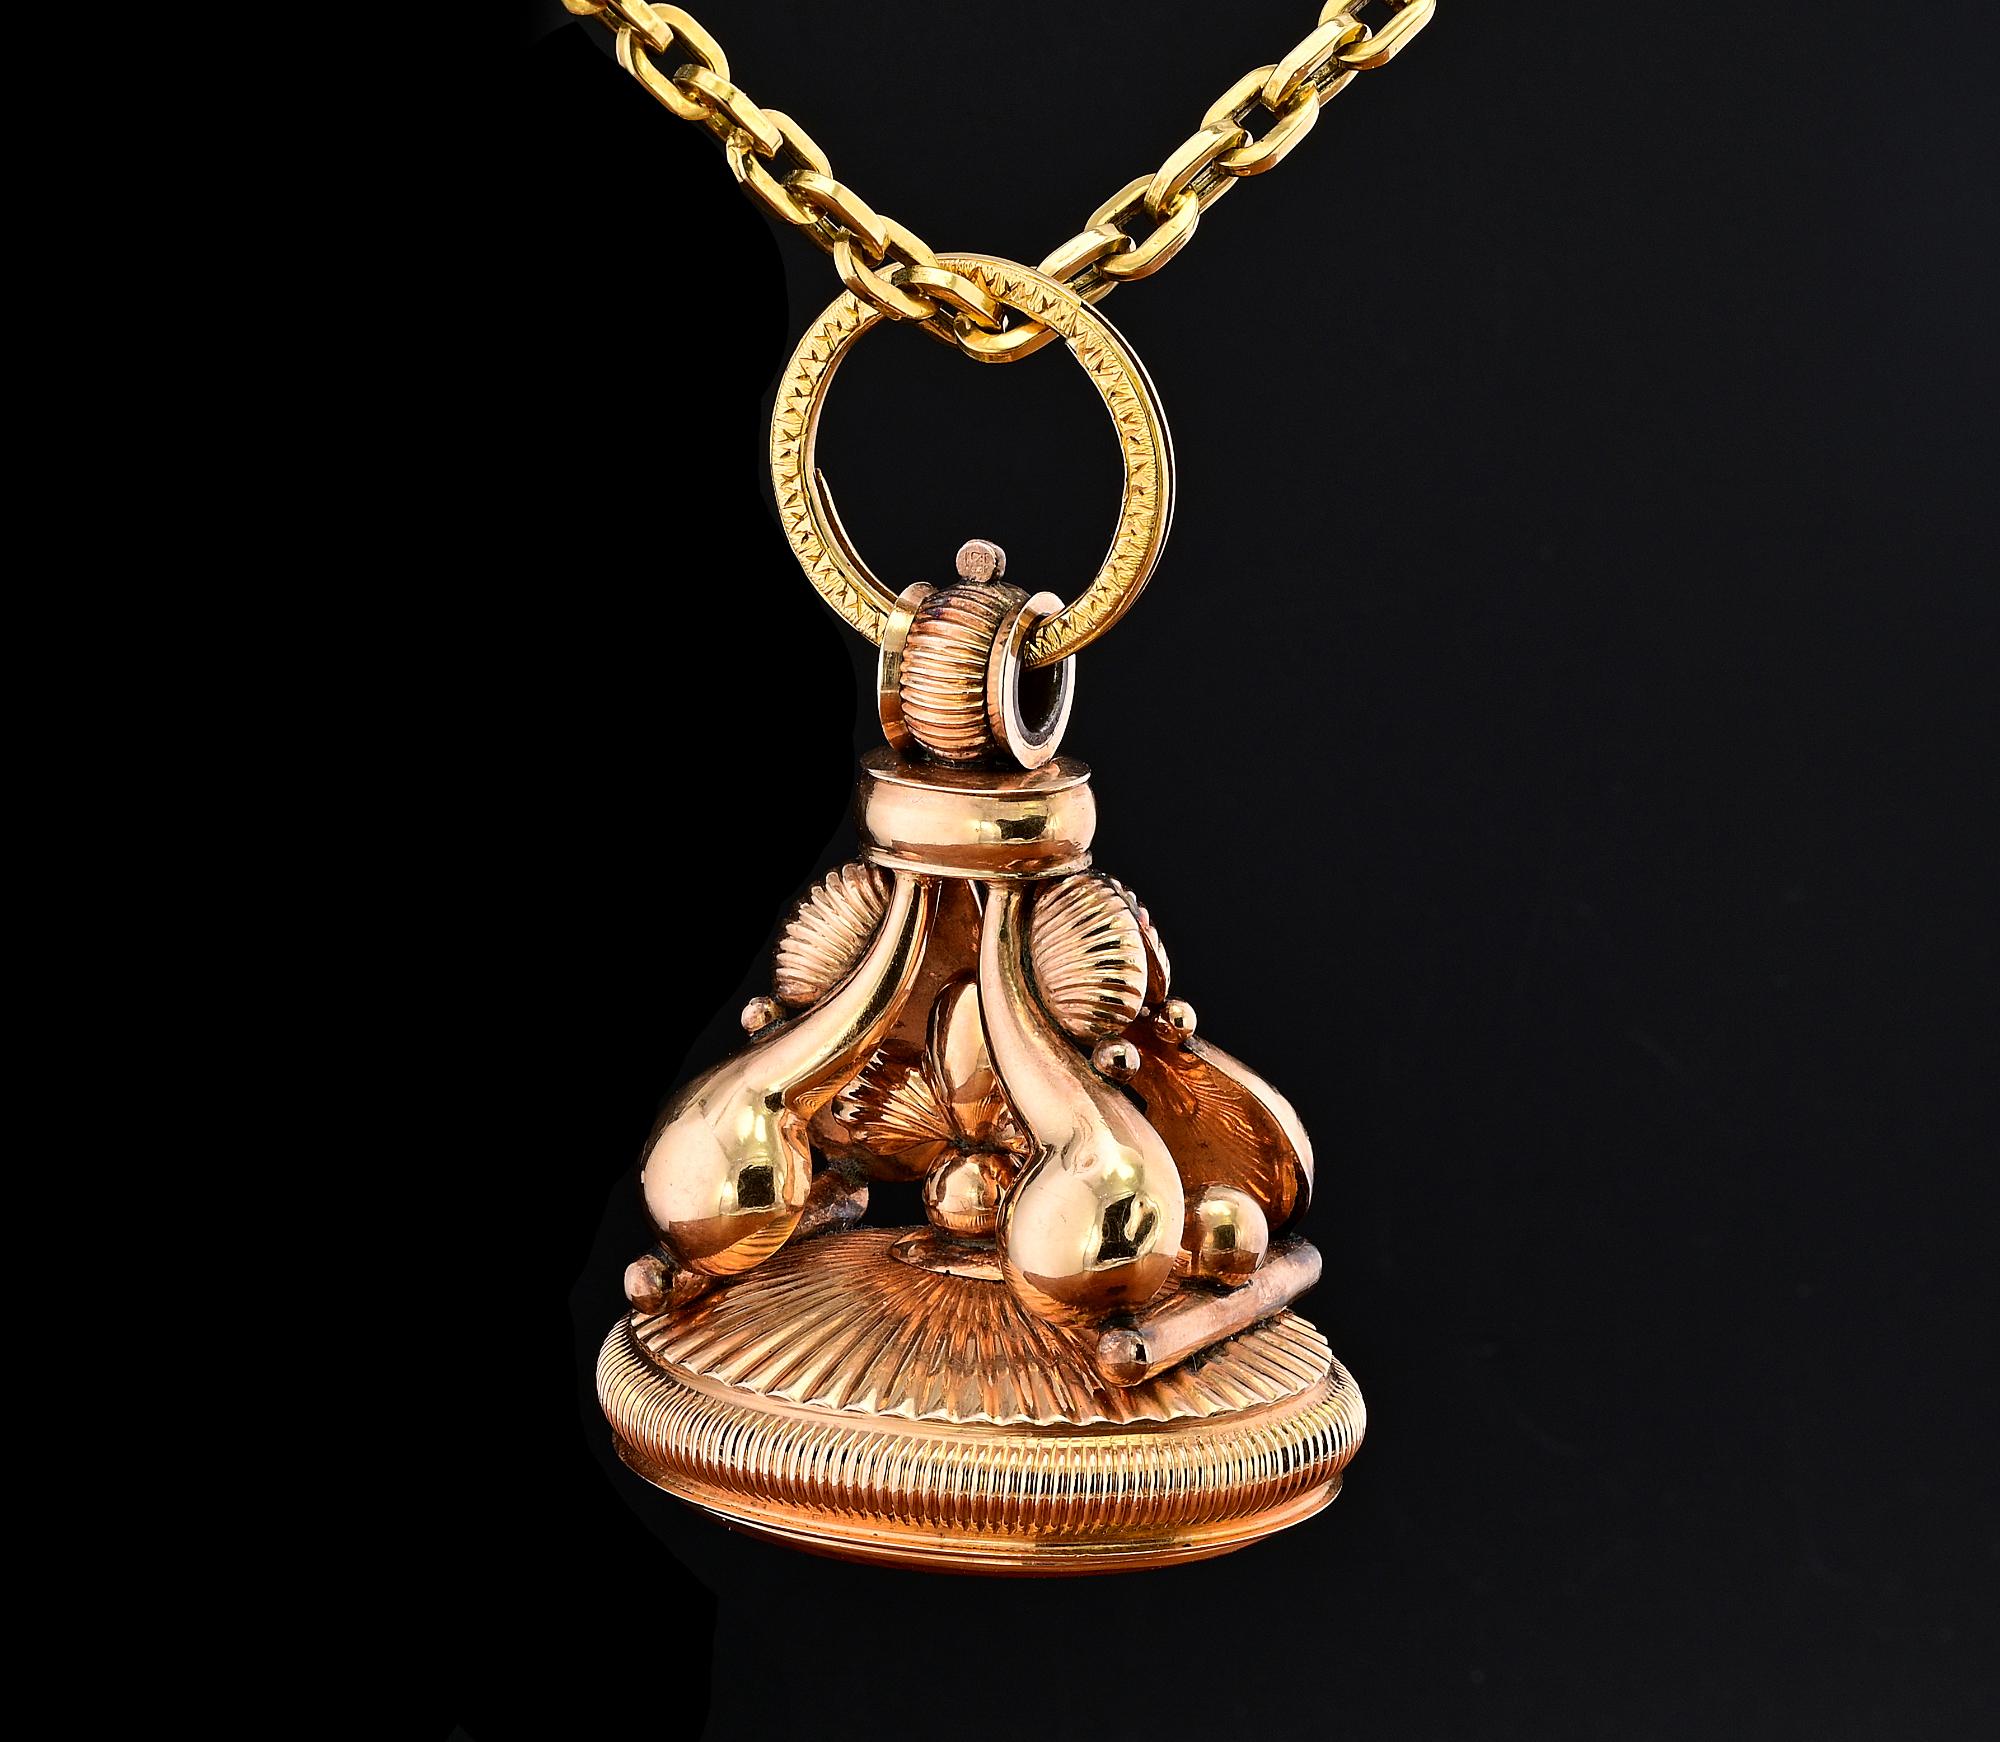 This superb antique Georgian period Carnelian Fob is from Prague bearing hallmarks dated 1806 – solid 14 Kt gold
Magnificent in shape and superb Georgian workmanship, pretty large in size
Hanging from a solid 18 KT solid gold chain connected to a